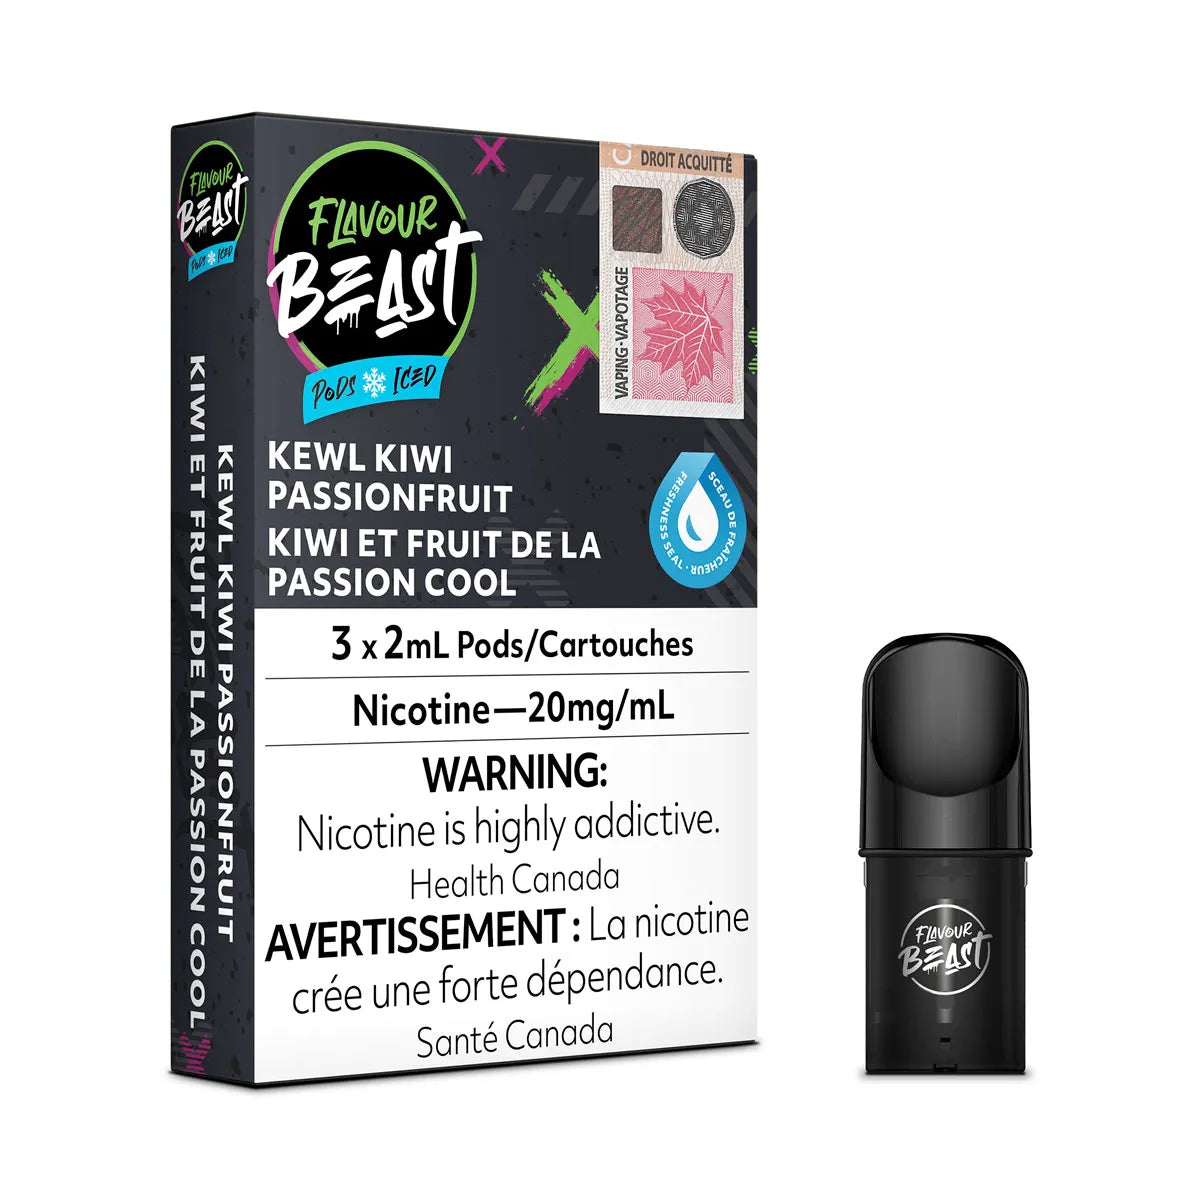 KEWL Kiwi Passionfruit - Flavour Beast Pod Pack - 20mg - EXCISED